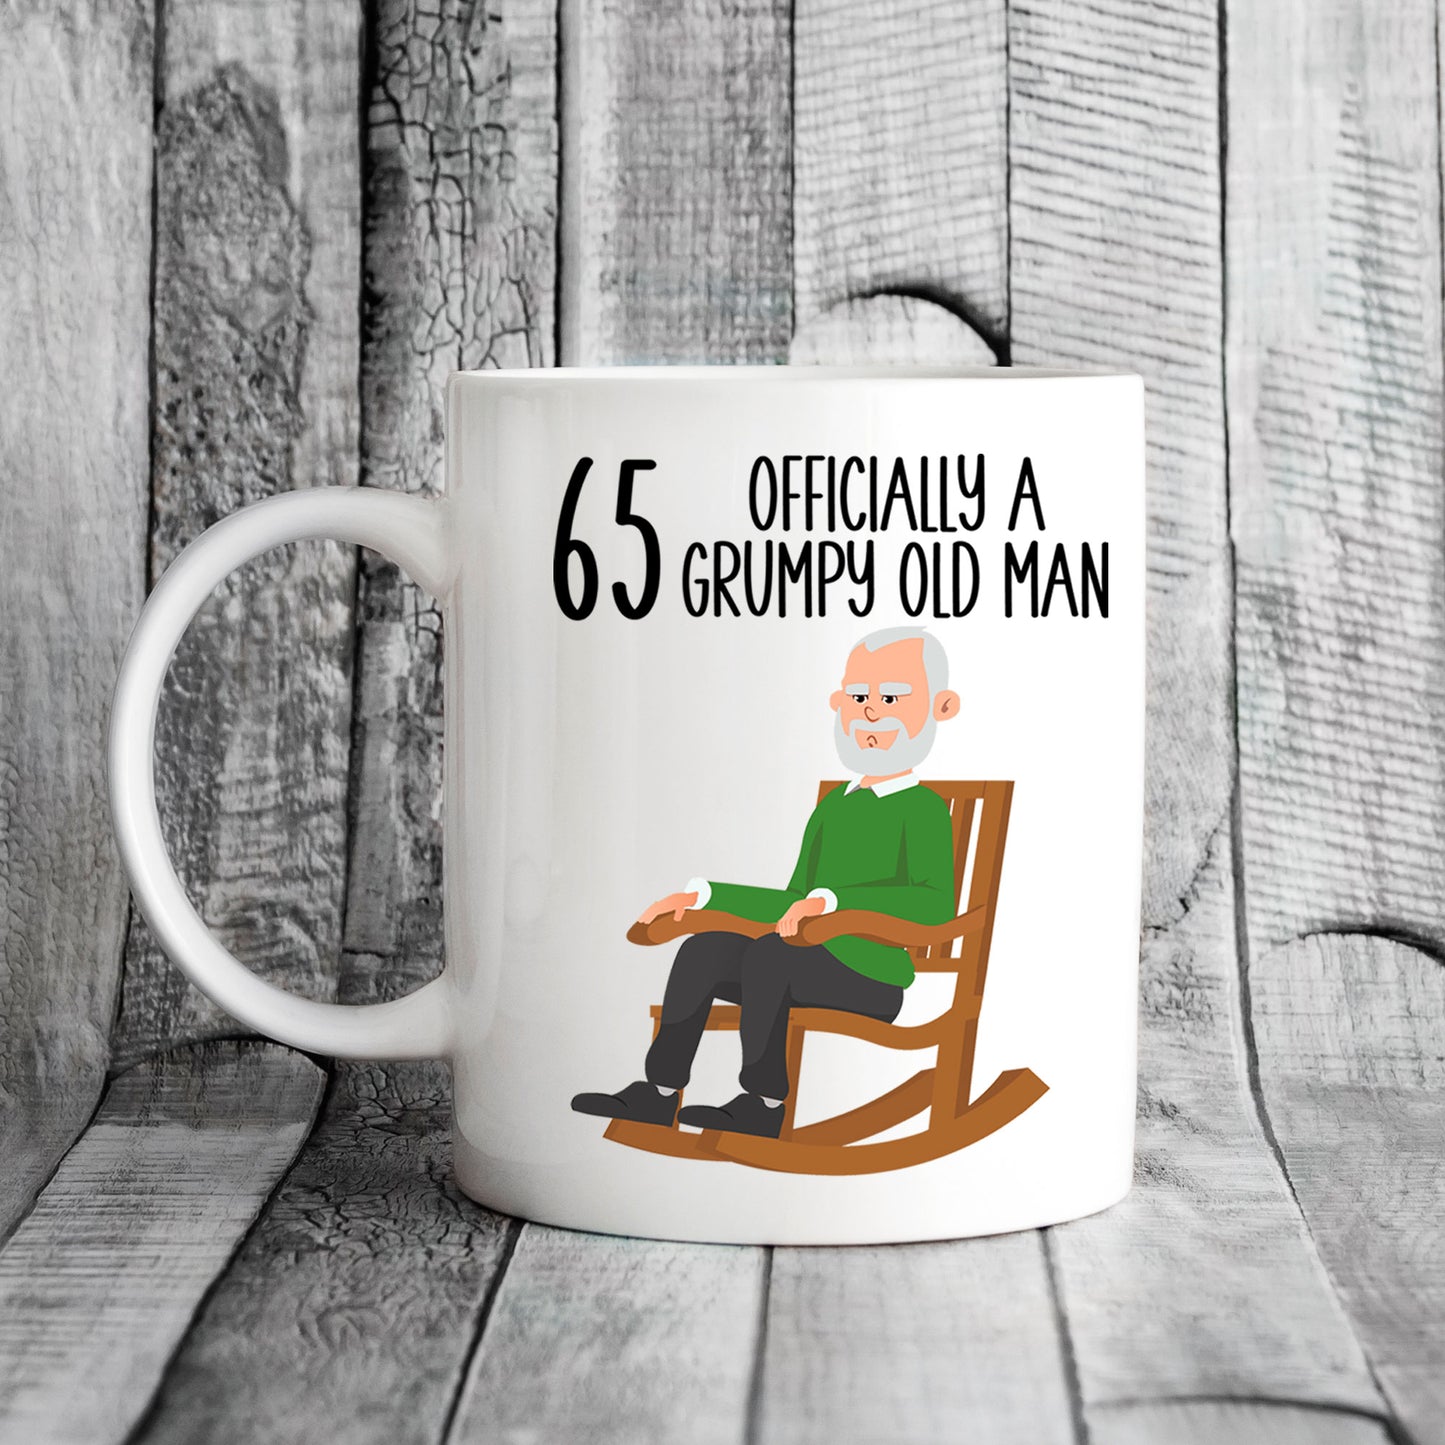 65 Officially A Grumpy Old Man Mug and/or Coaster Gift  - Always Looking Good -   